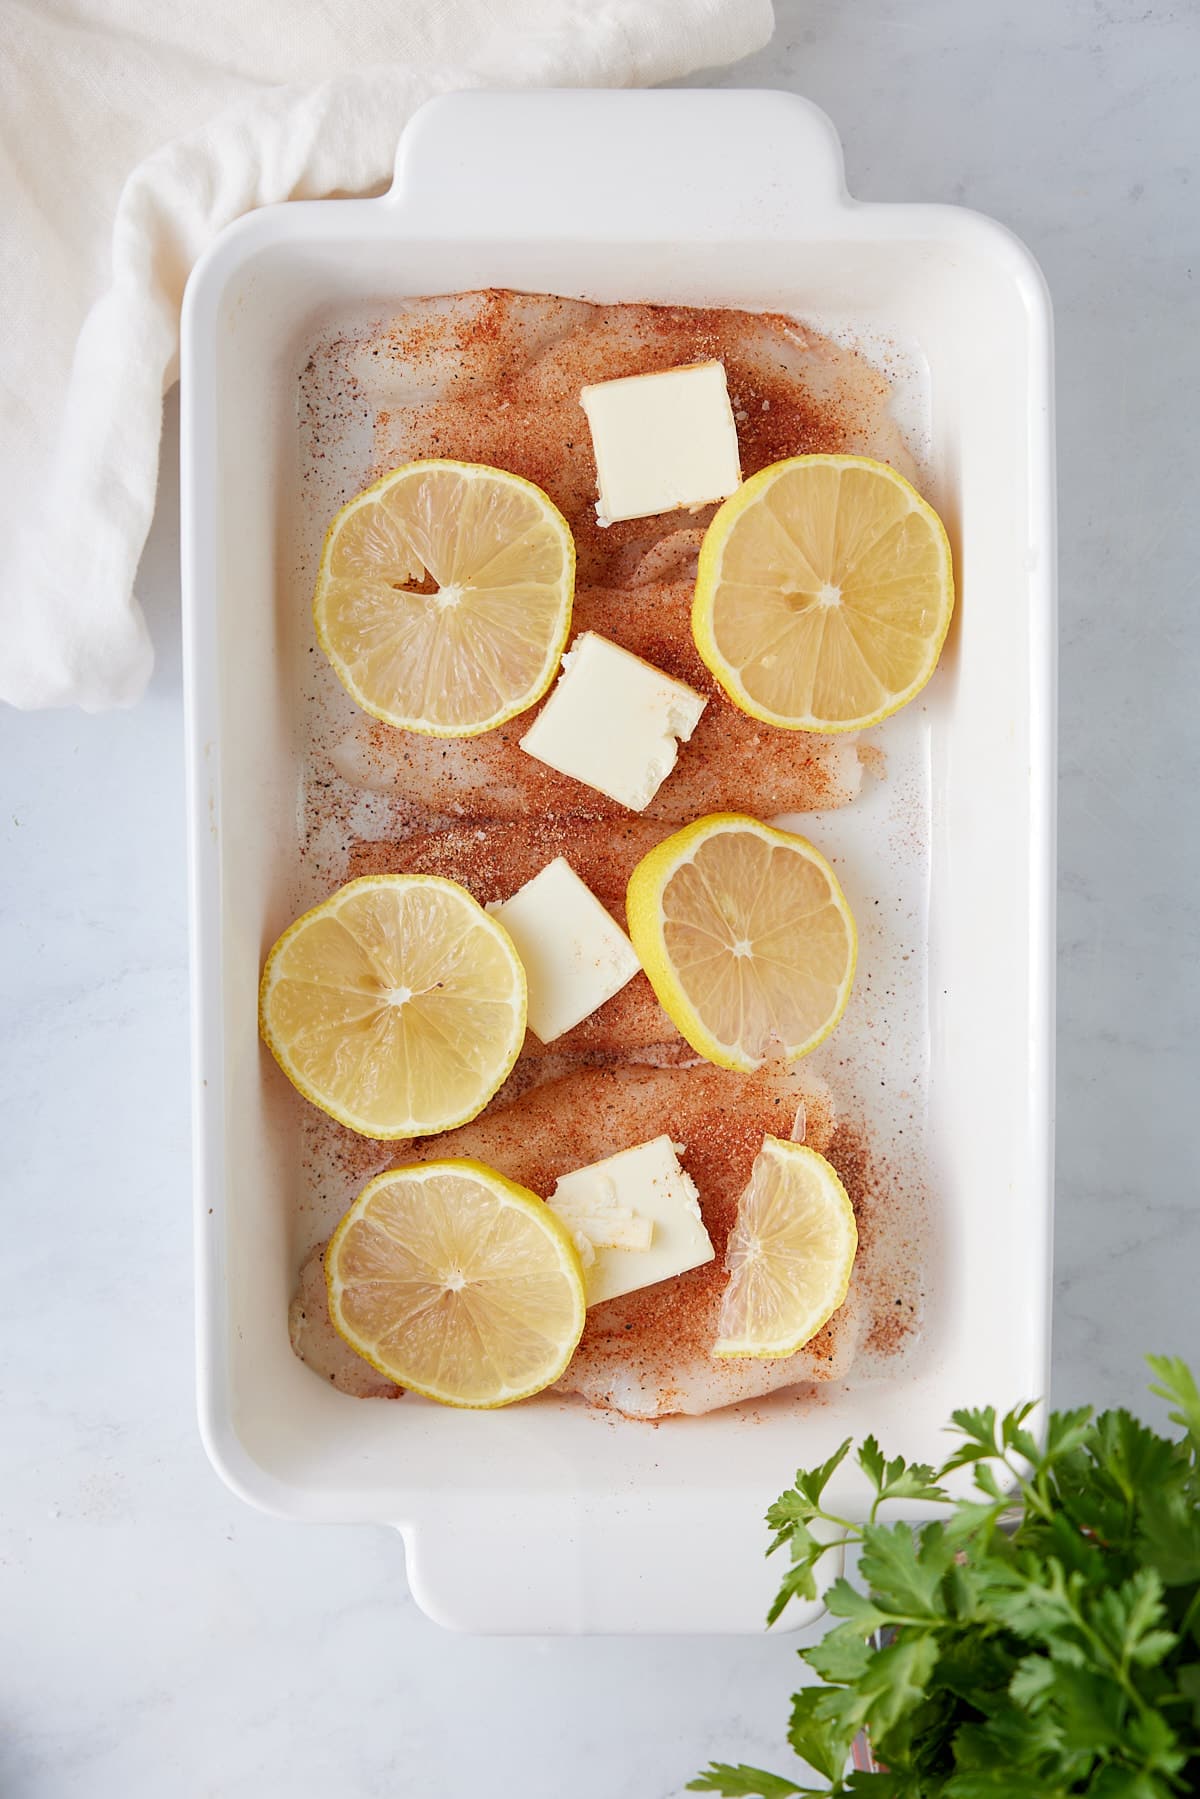 cod prepared in the baking dish with butter slices and sliced lemons